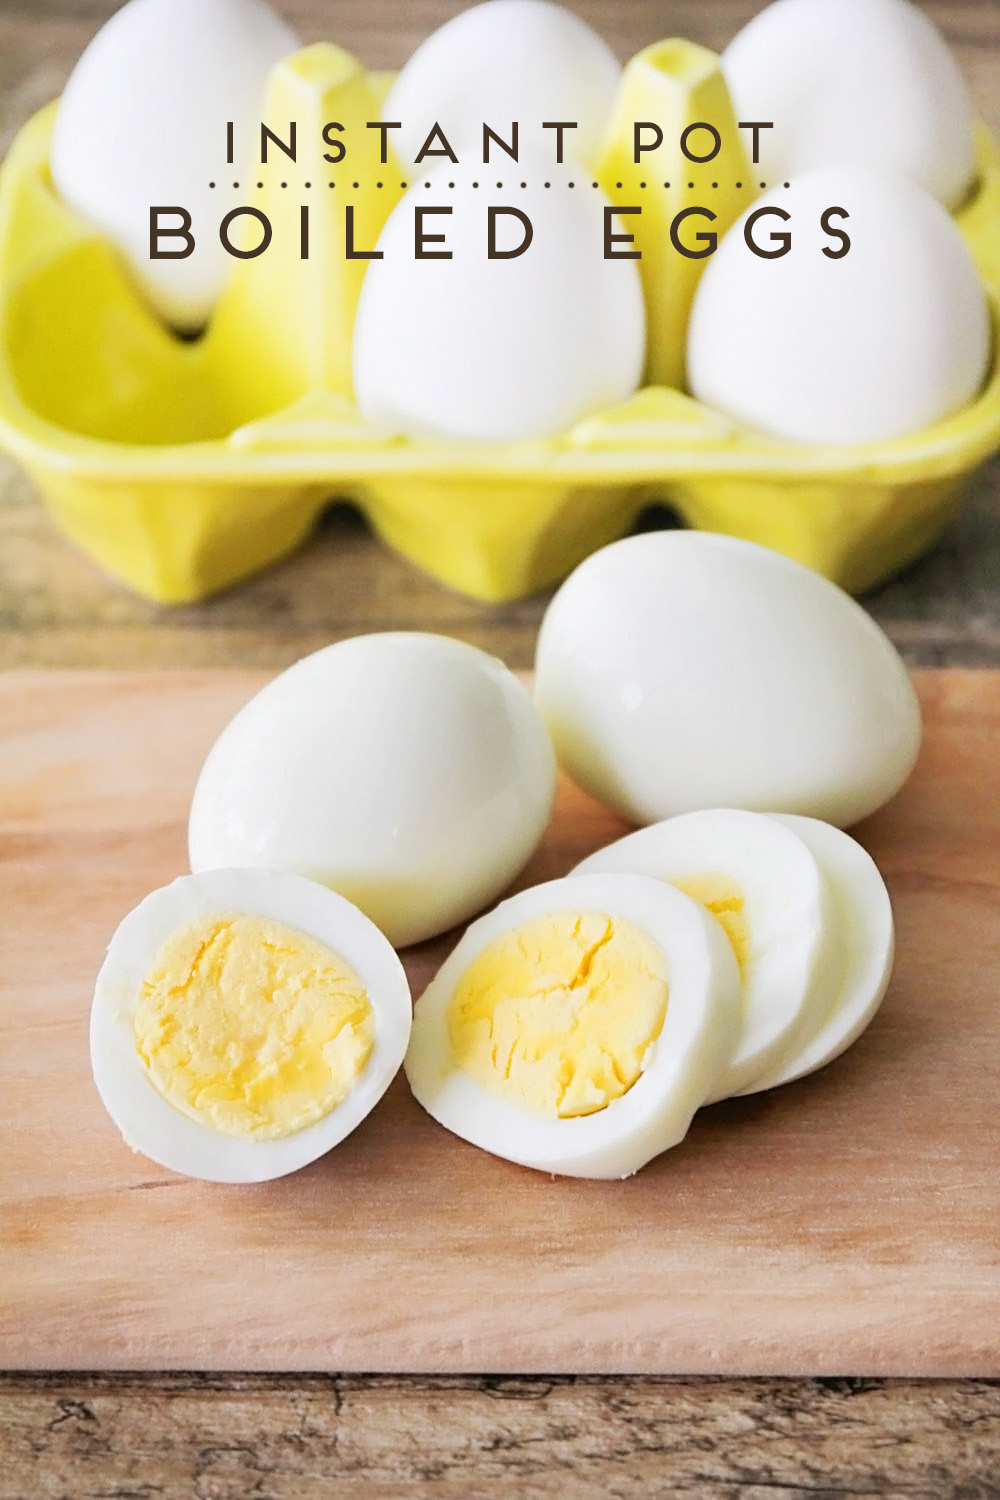 These instant pot boiled eggs are ready in 15 minutes and come out perfectly every time!